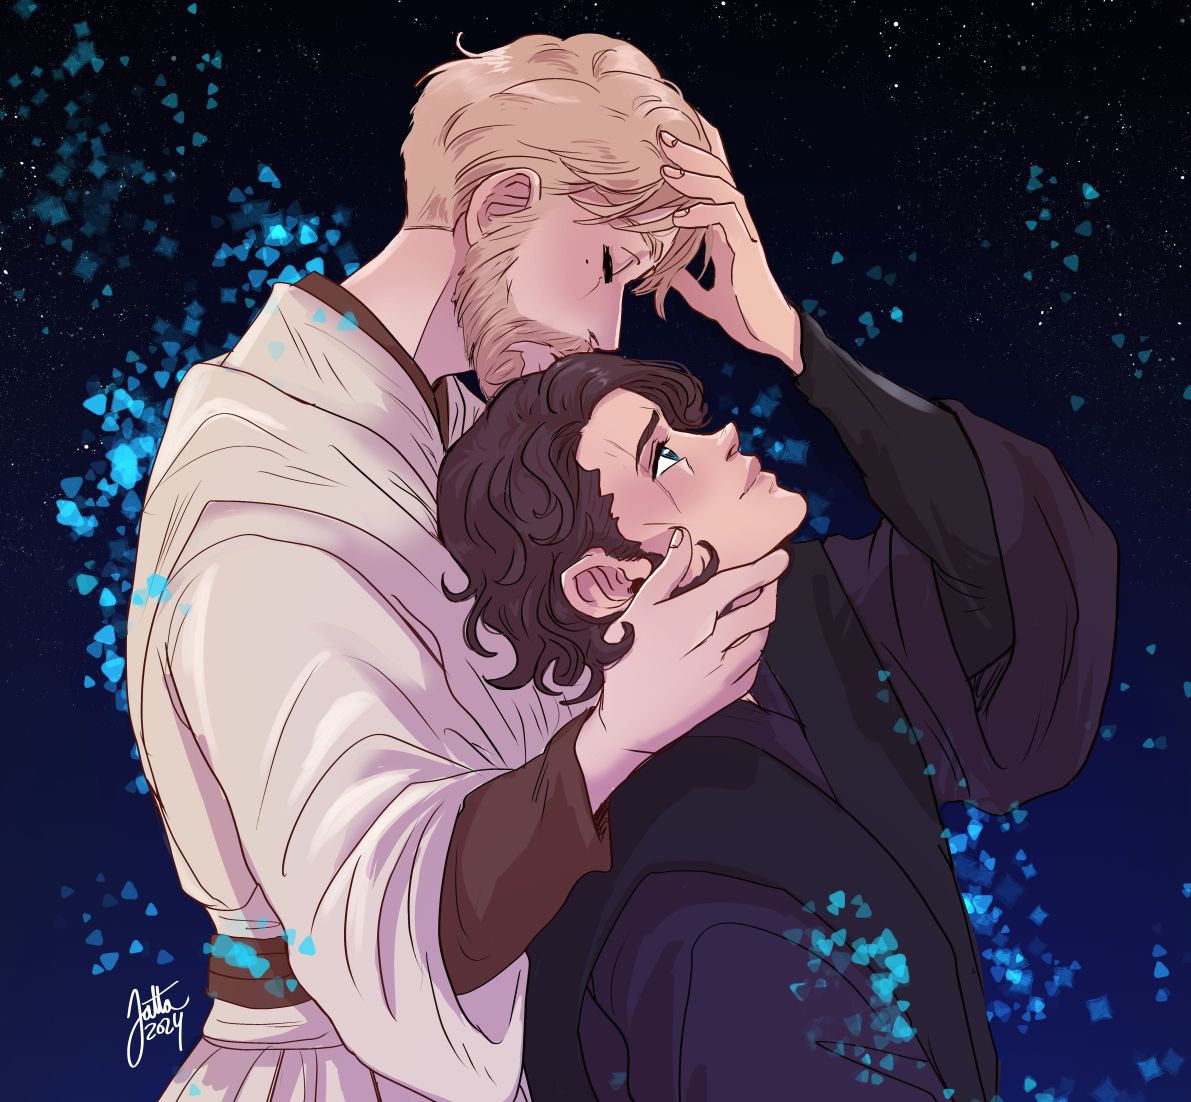 'May the Force be with you' Happy Star Wars Day! #obikin